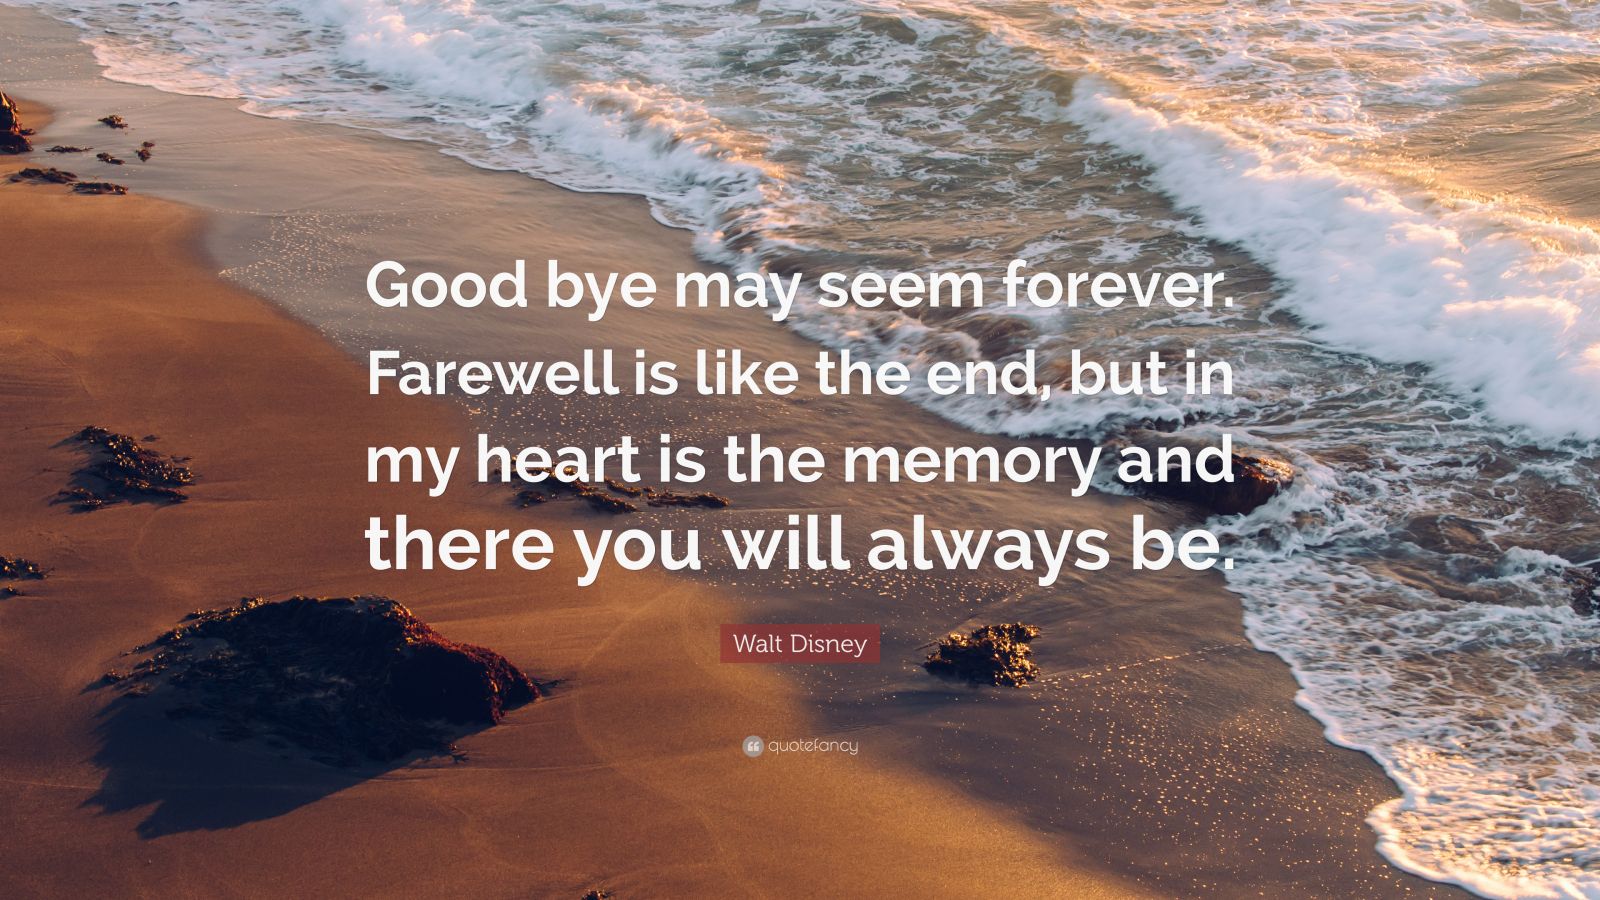 Walt Disney Quote: “Good bye may seem forever. Farewell is like the end